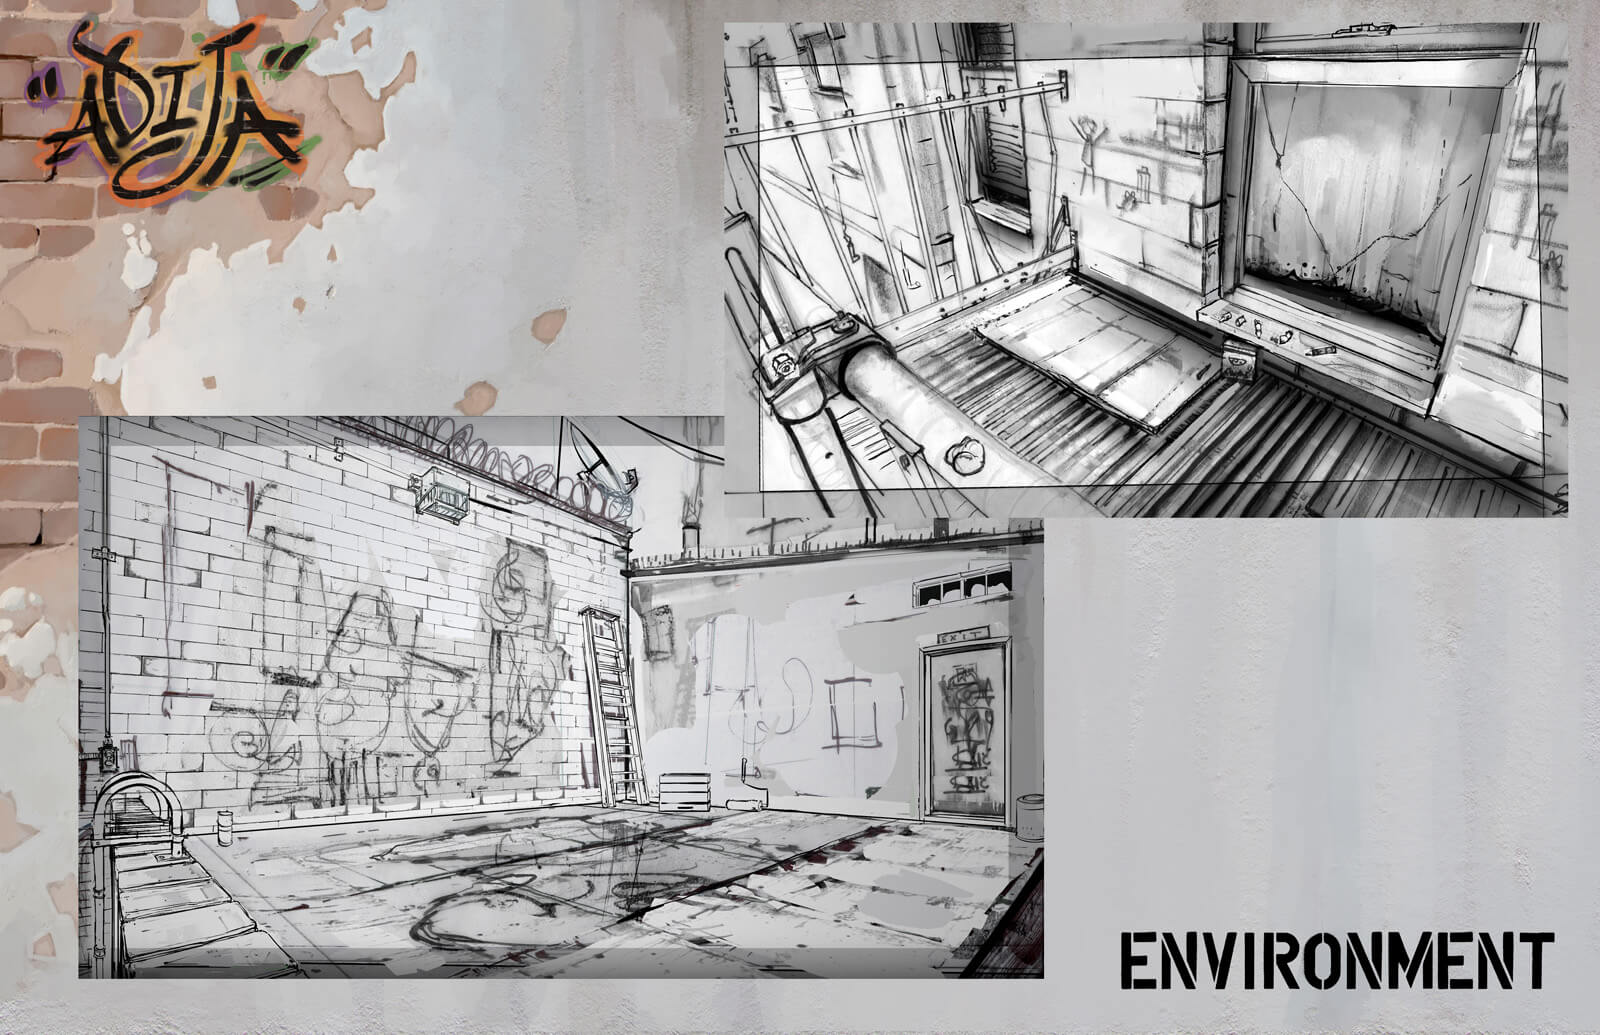 Environmental design sheet showing sketches of the apartment fire escape and roof seen in the film Adija